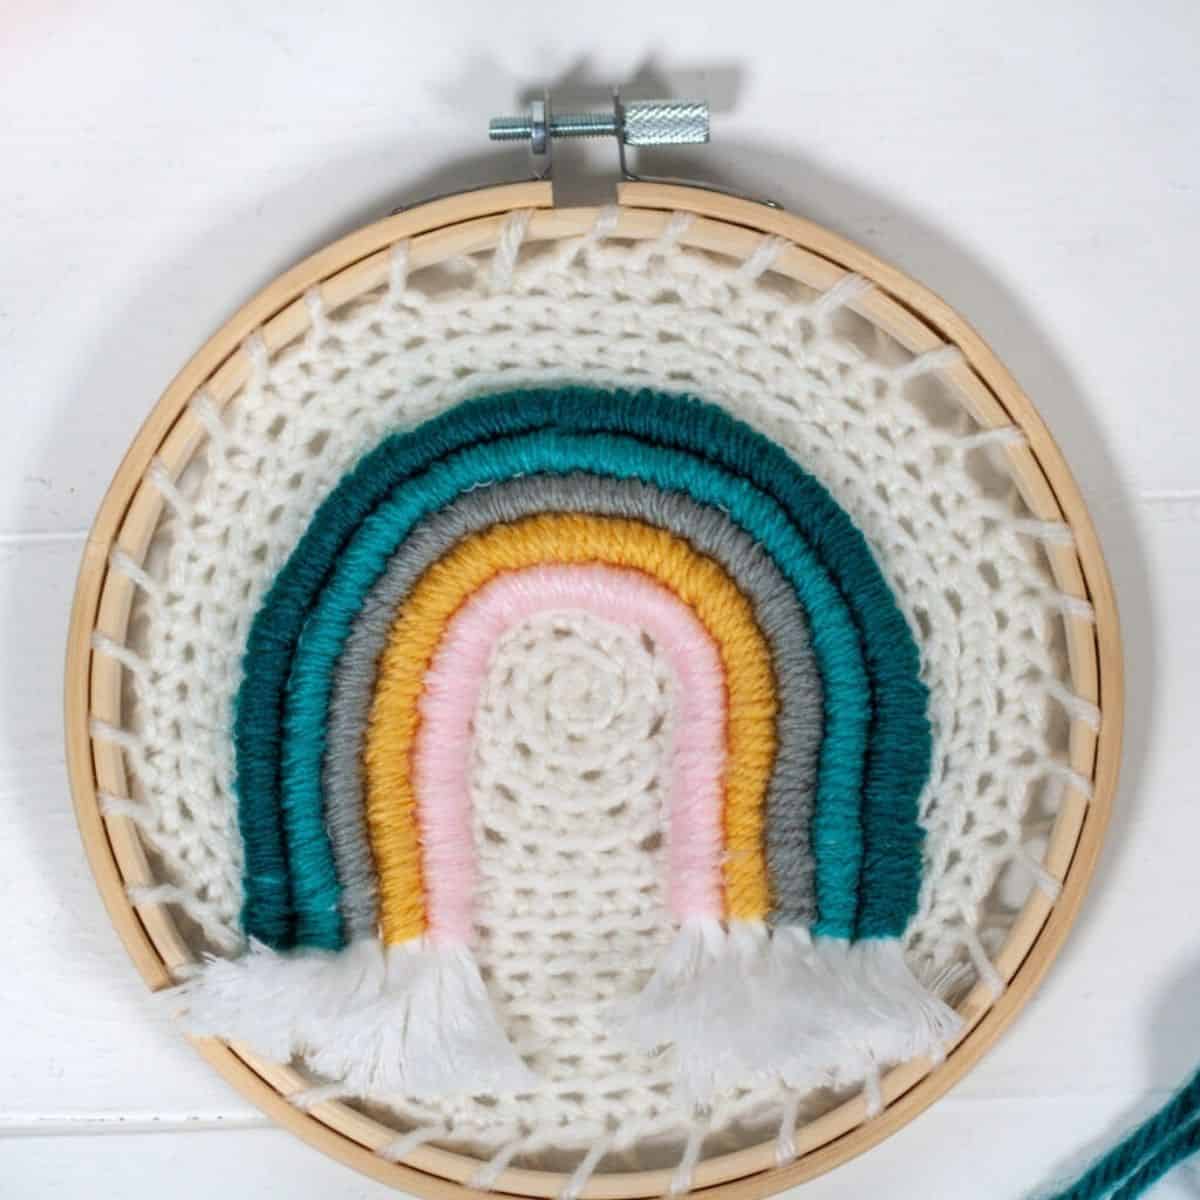 small crochet and yarn rainbow in an embroidery hoop.